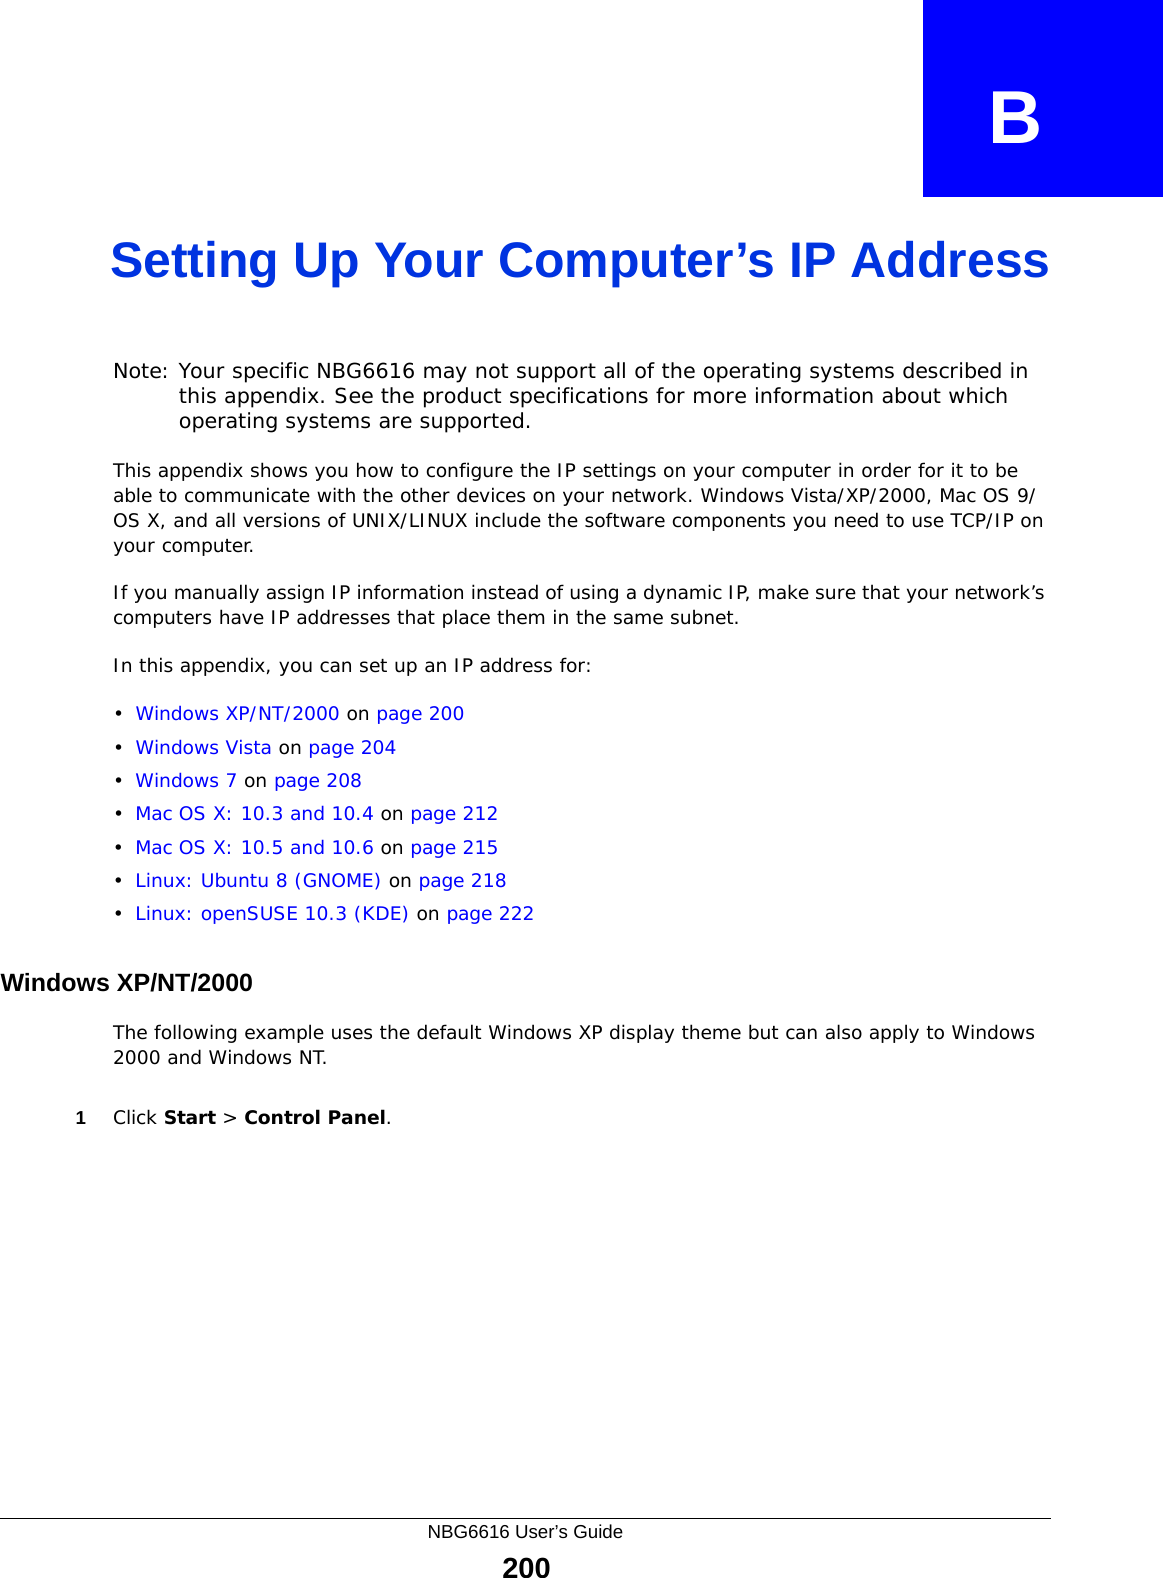 NBG6616 User’s Guide200APPENDIX   BSetting Up Your Computer’s IP AddressNote: Your specific NBG6616 may not support all of the operating systems described in this appendix. See the product specifications for more information about which operating systems are supported.This appendix shows you how to configure the IP settings on your computer in order for it to be able to communicate with the other devices on your network. Windows Vista/XP/2000, Mac OS 9/OS X, and all versions of UNIX/LINUX include the software components you need to use TCP/IP on your computer. If you manually assign IP information instead of using a dynamic IP, make sure that your network’s computers have IP addresses that place them in the same subnet.In this appendix, you can set up an IP address for:•Windows XP/NT/2000 on page 200•Windows Vista on page 204•Windows 7 on page 208•Mac OS X: 10.3 and 10.4 on page 212•Mac OS X: 10.5 and 10.6 on page 215•Linux: Ubuntu 8 (GNOME) on page 218•Linux: openSUSE 10.3 (KDE) on page 222Windows XP/NT/2000The following example uses the default Windows XP display theme but can also apply to Windows 2000 and Windows NT.1Click Start &gt; Control Panel.